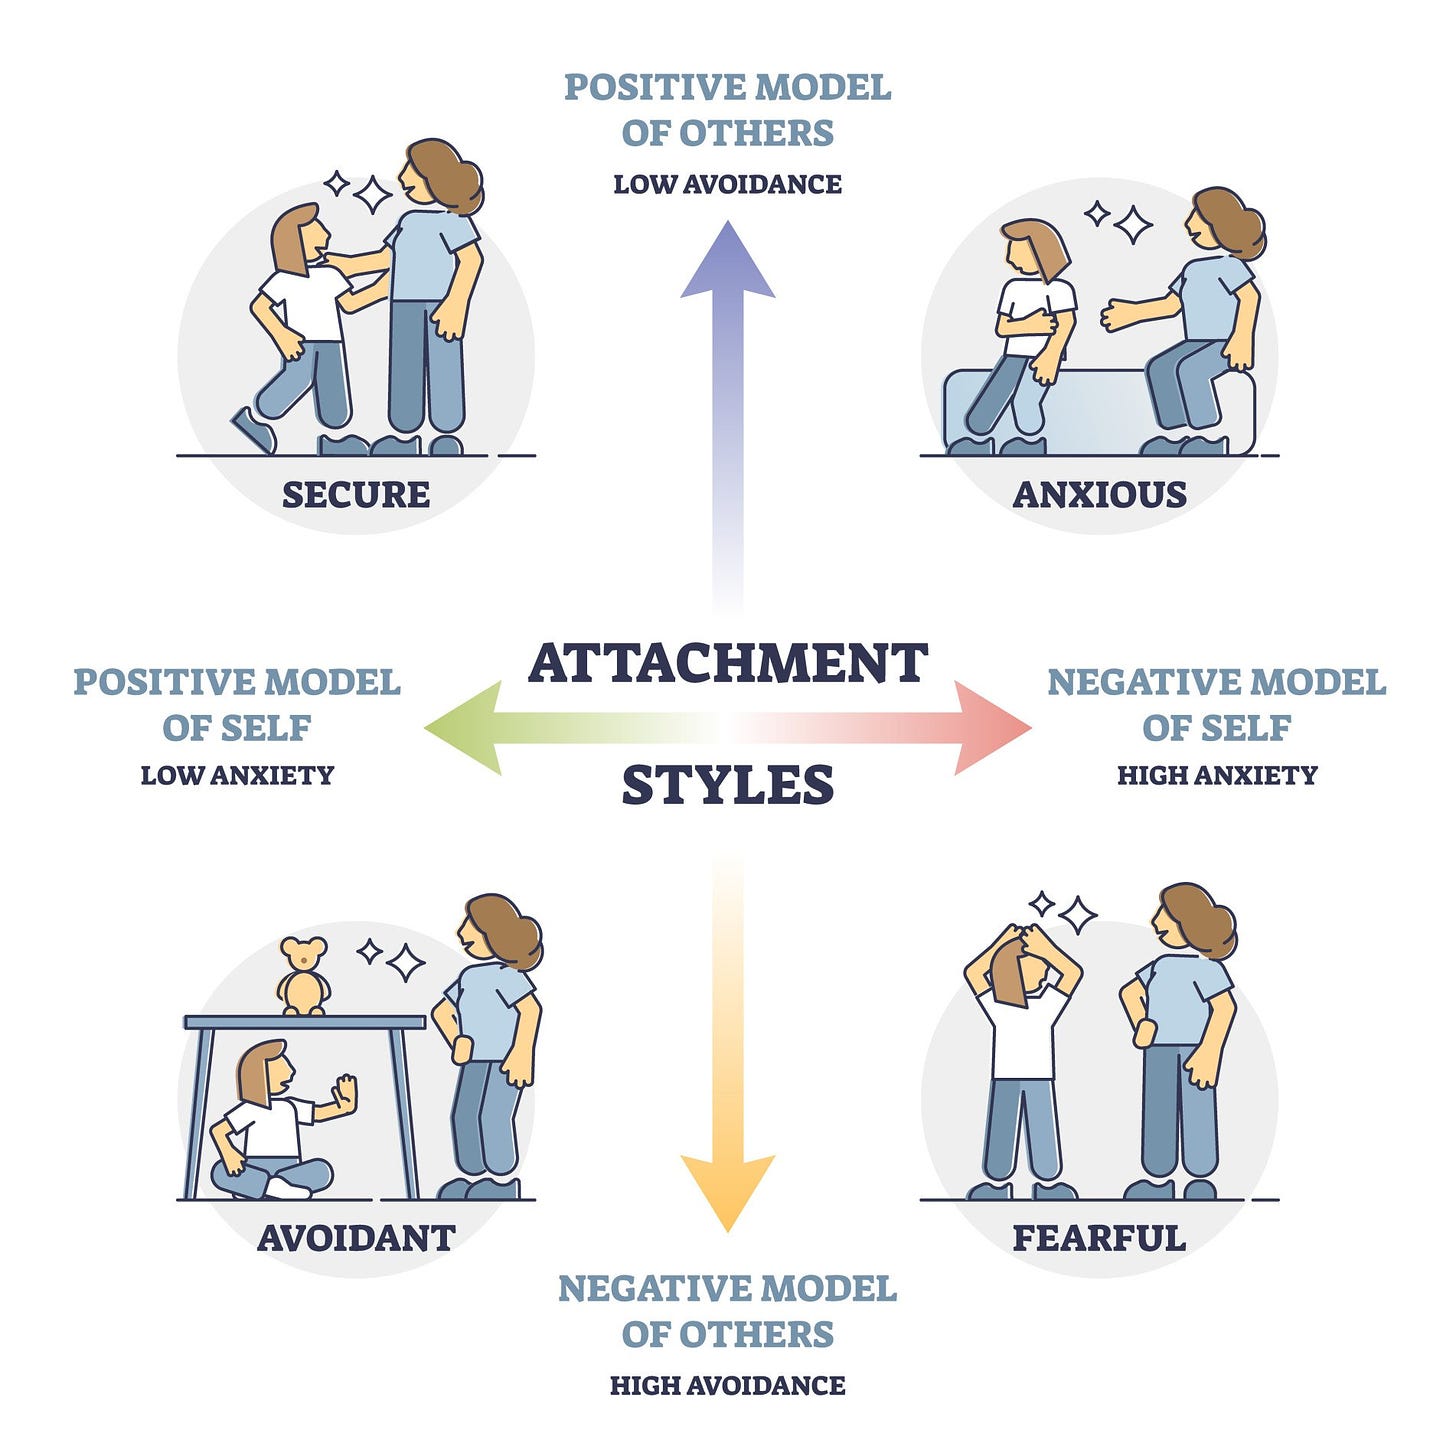 Attachment styles as secure, anxious, avoidant or fearful outline diagram. Labeled educational axis scale with high or low avoidance and anxiety as influence to people relationship vector